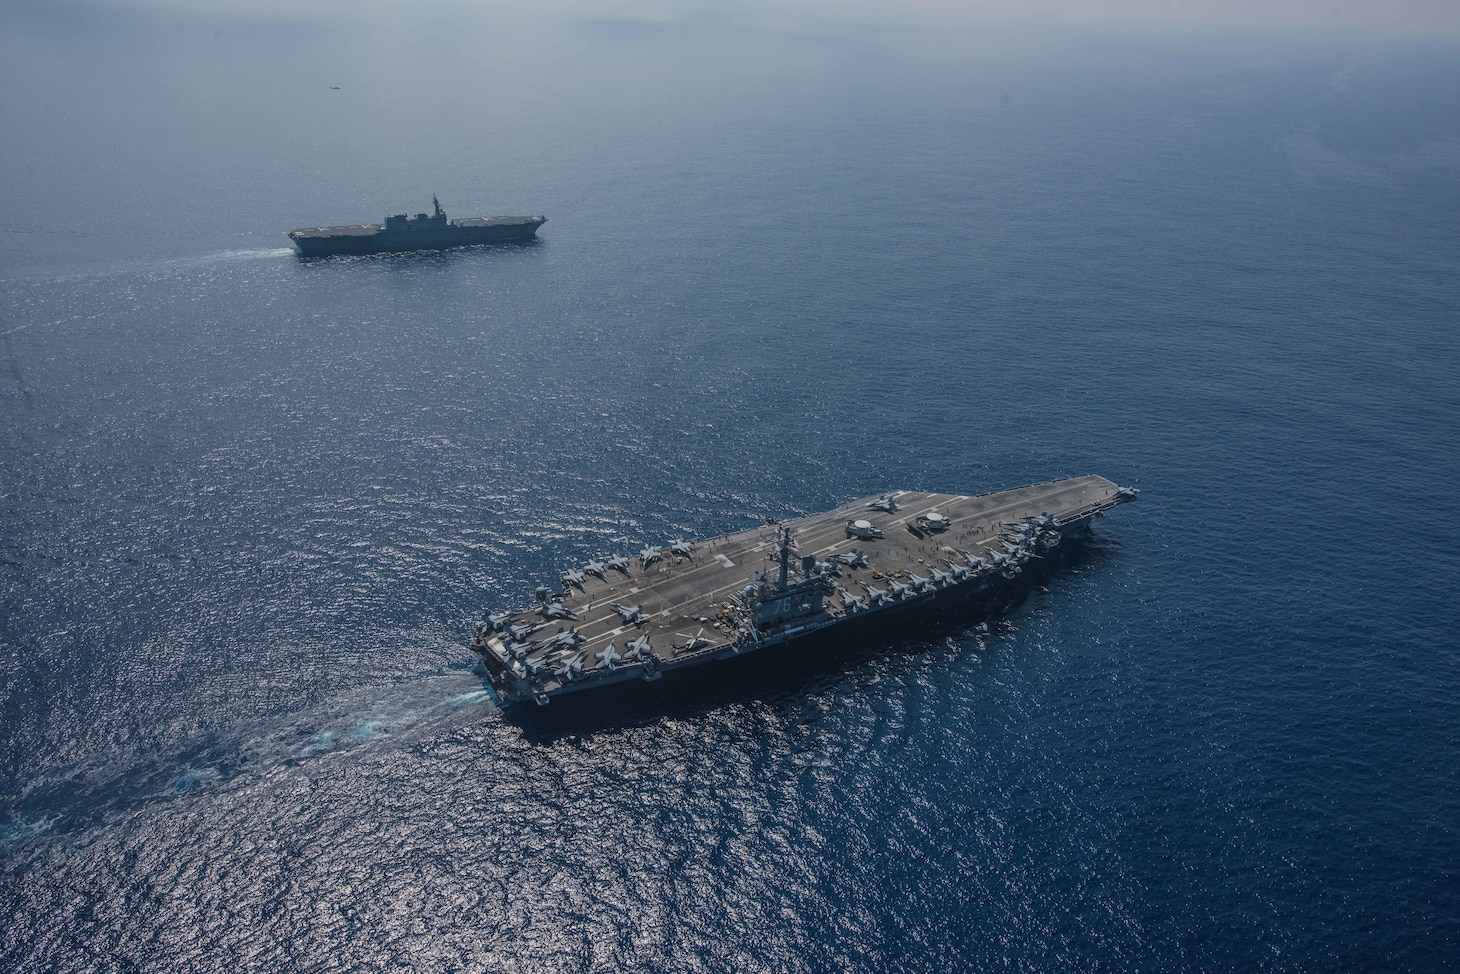 PHILIPPINE SEA (October 9, 2018) The Nimitz-class aircraft carrier USS Ronald Reagan (CVN 76) and the helicopter destroyer JS Izumo (DDH 183) sail alongside each other during a cooperative deployment. Ronald Reagan is forward-deployed to the U.S. 7th fleet area of operations in support of security and stability in the Indo-Pacific region.